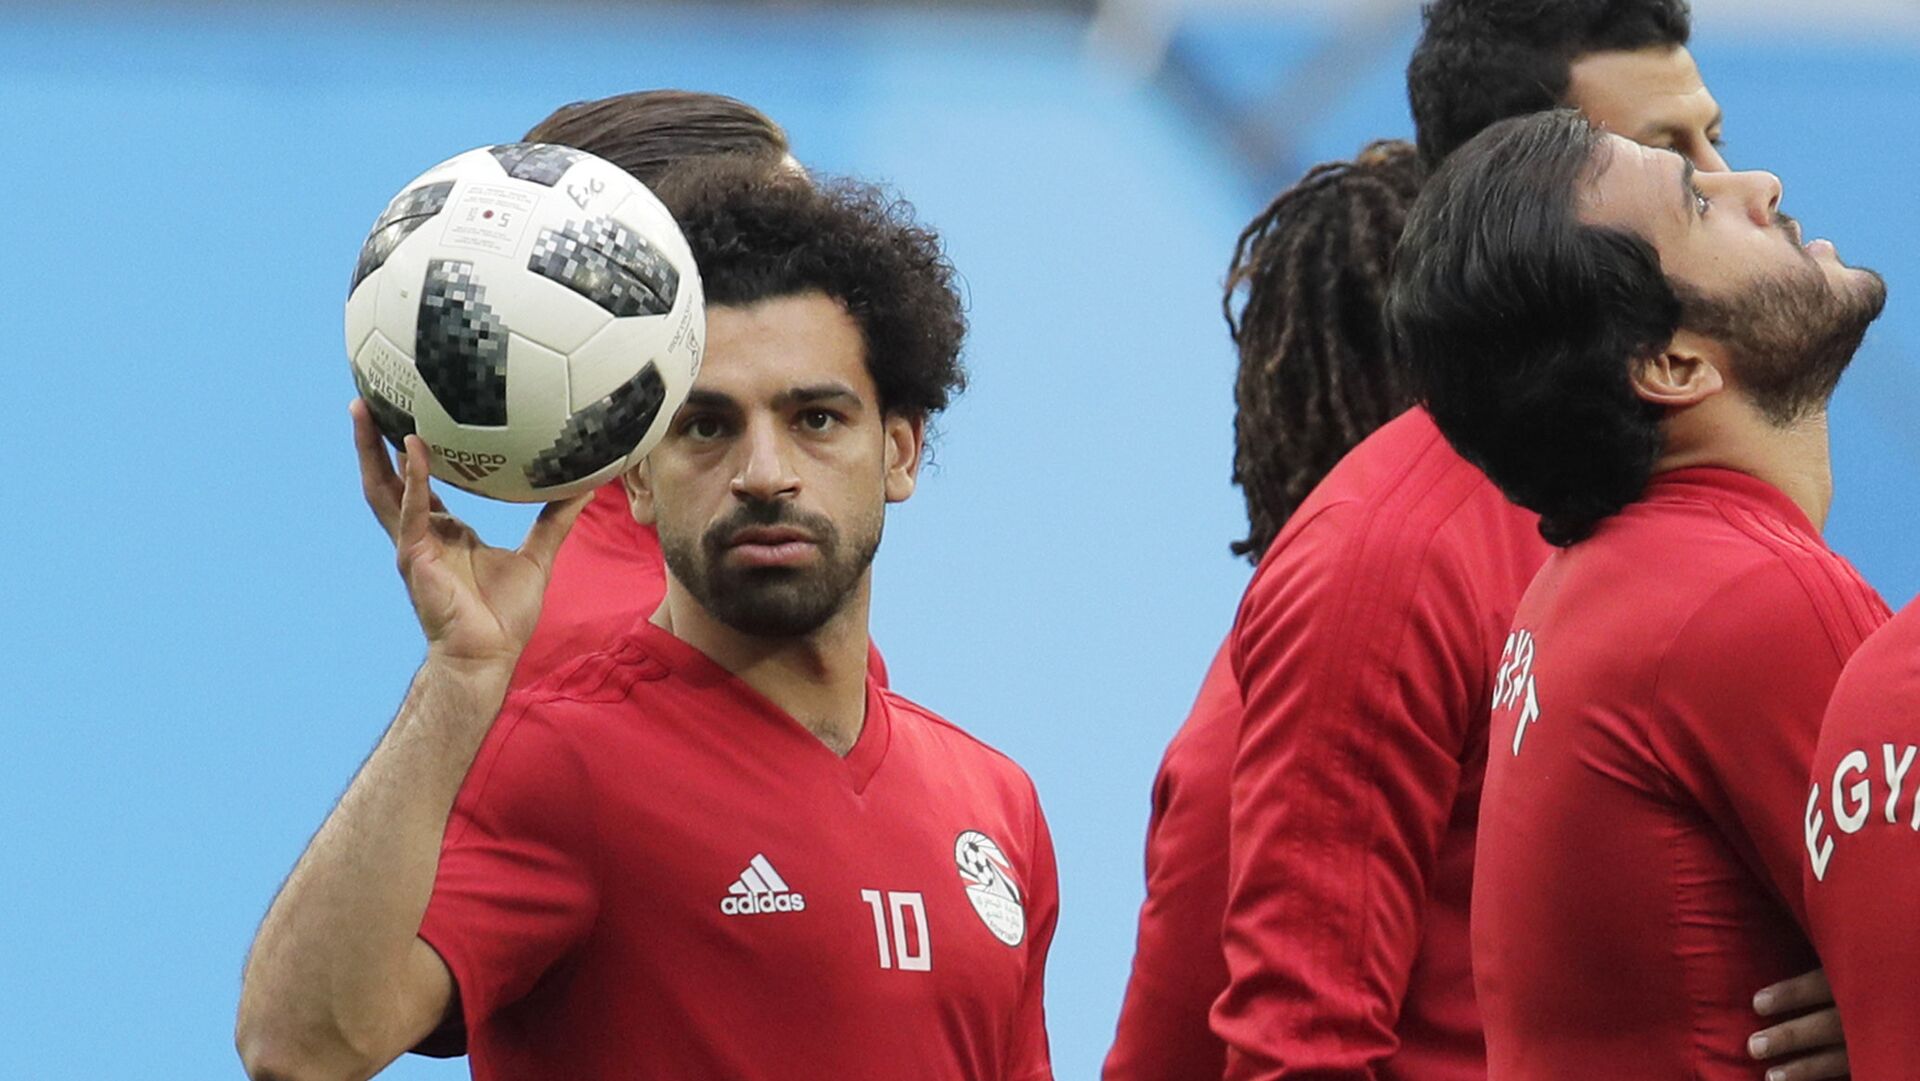 Egypt's Mohamed Salah, left, plays with the ball during Egypt's official training on the eve of the group A match between Russia and Egypt at the 2018 soccer World Cup in the St. Petersburg stadium in St. Petersburg, Russia, Monday, June 18, 2018 - اسپوتنیک افغانستان  , 1920, 07.02.2022